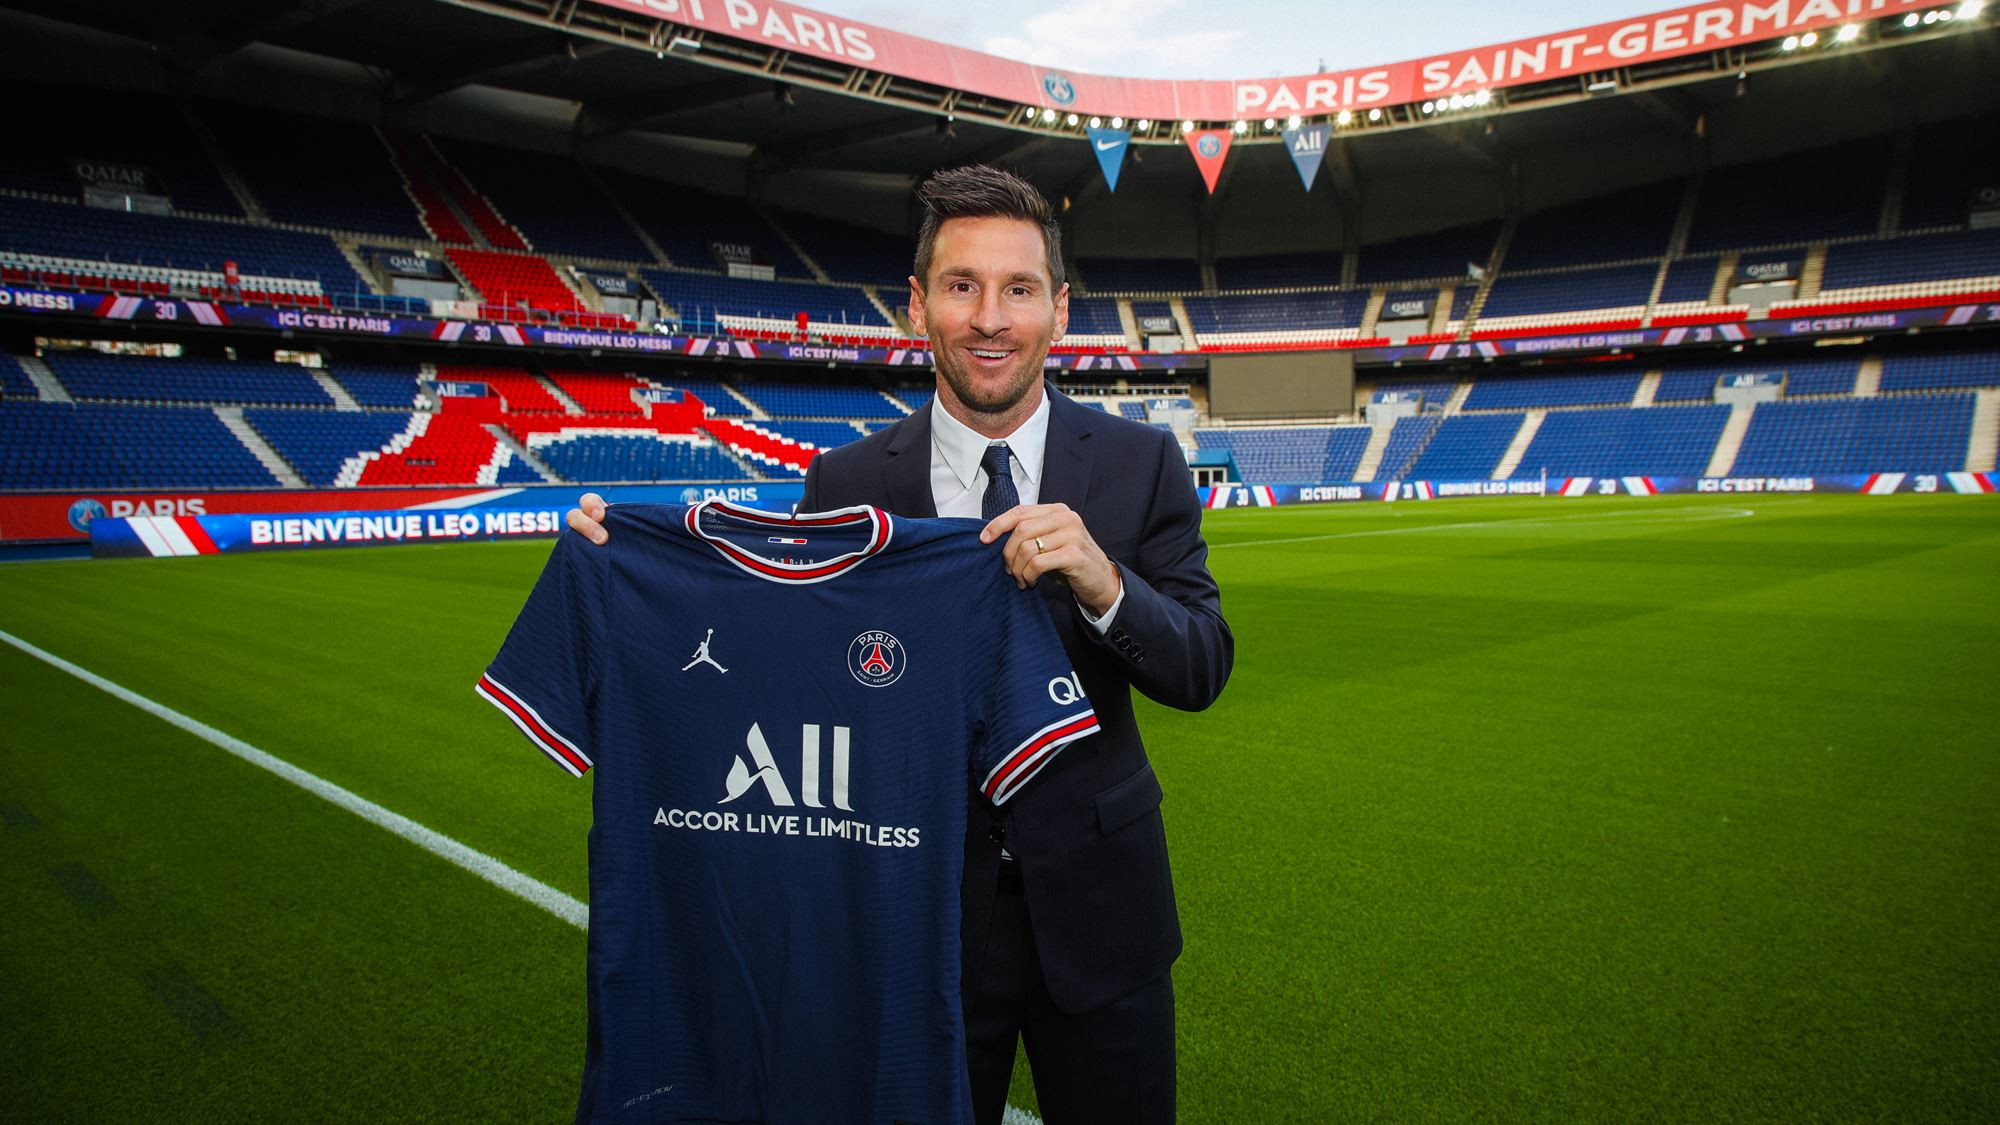 Paris Saint-Germain officially unveil Lionel Messi after agreeing lucrative two-year contract